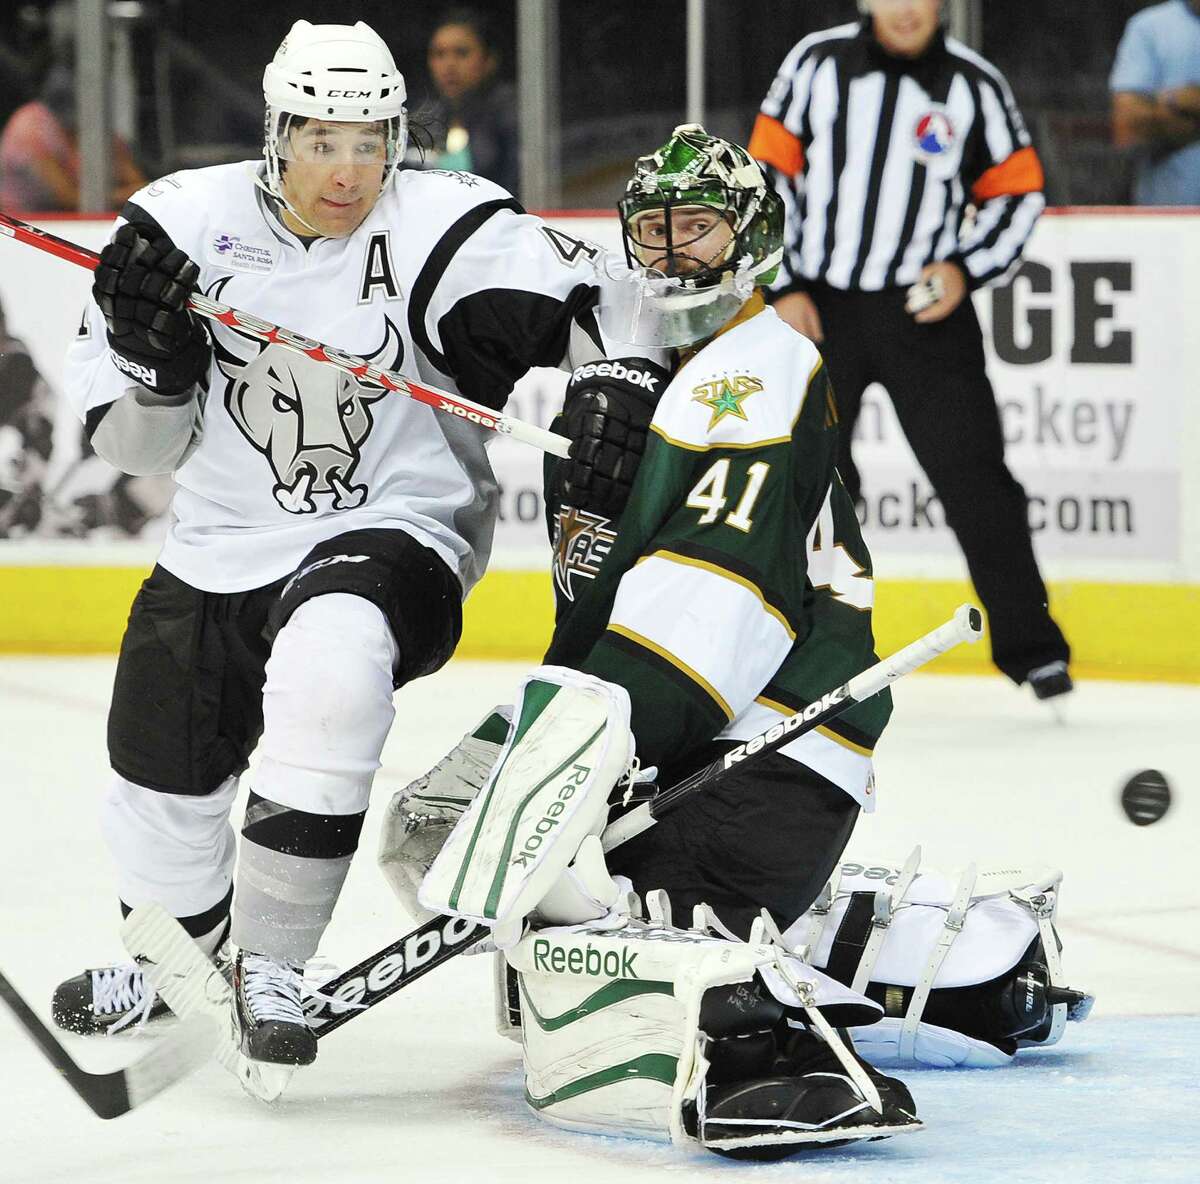 Rampage right wing Jed Ortmeyer (left) tussles with Texas goaltender Christopher Nilstorp during the second period at the AT&T Center. Garrett Wilson scored for the Rampage.